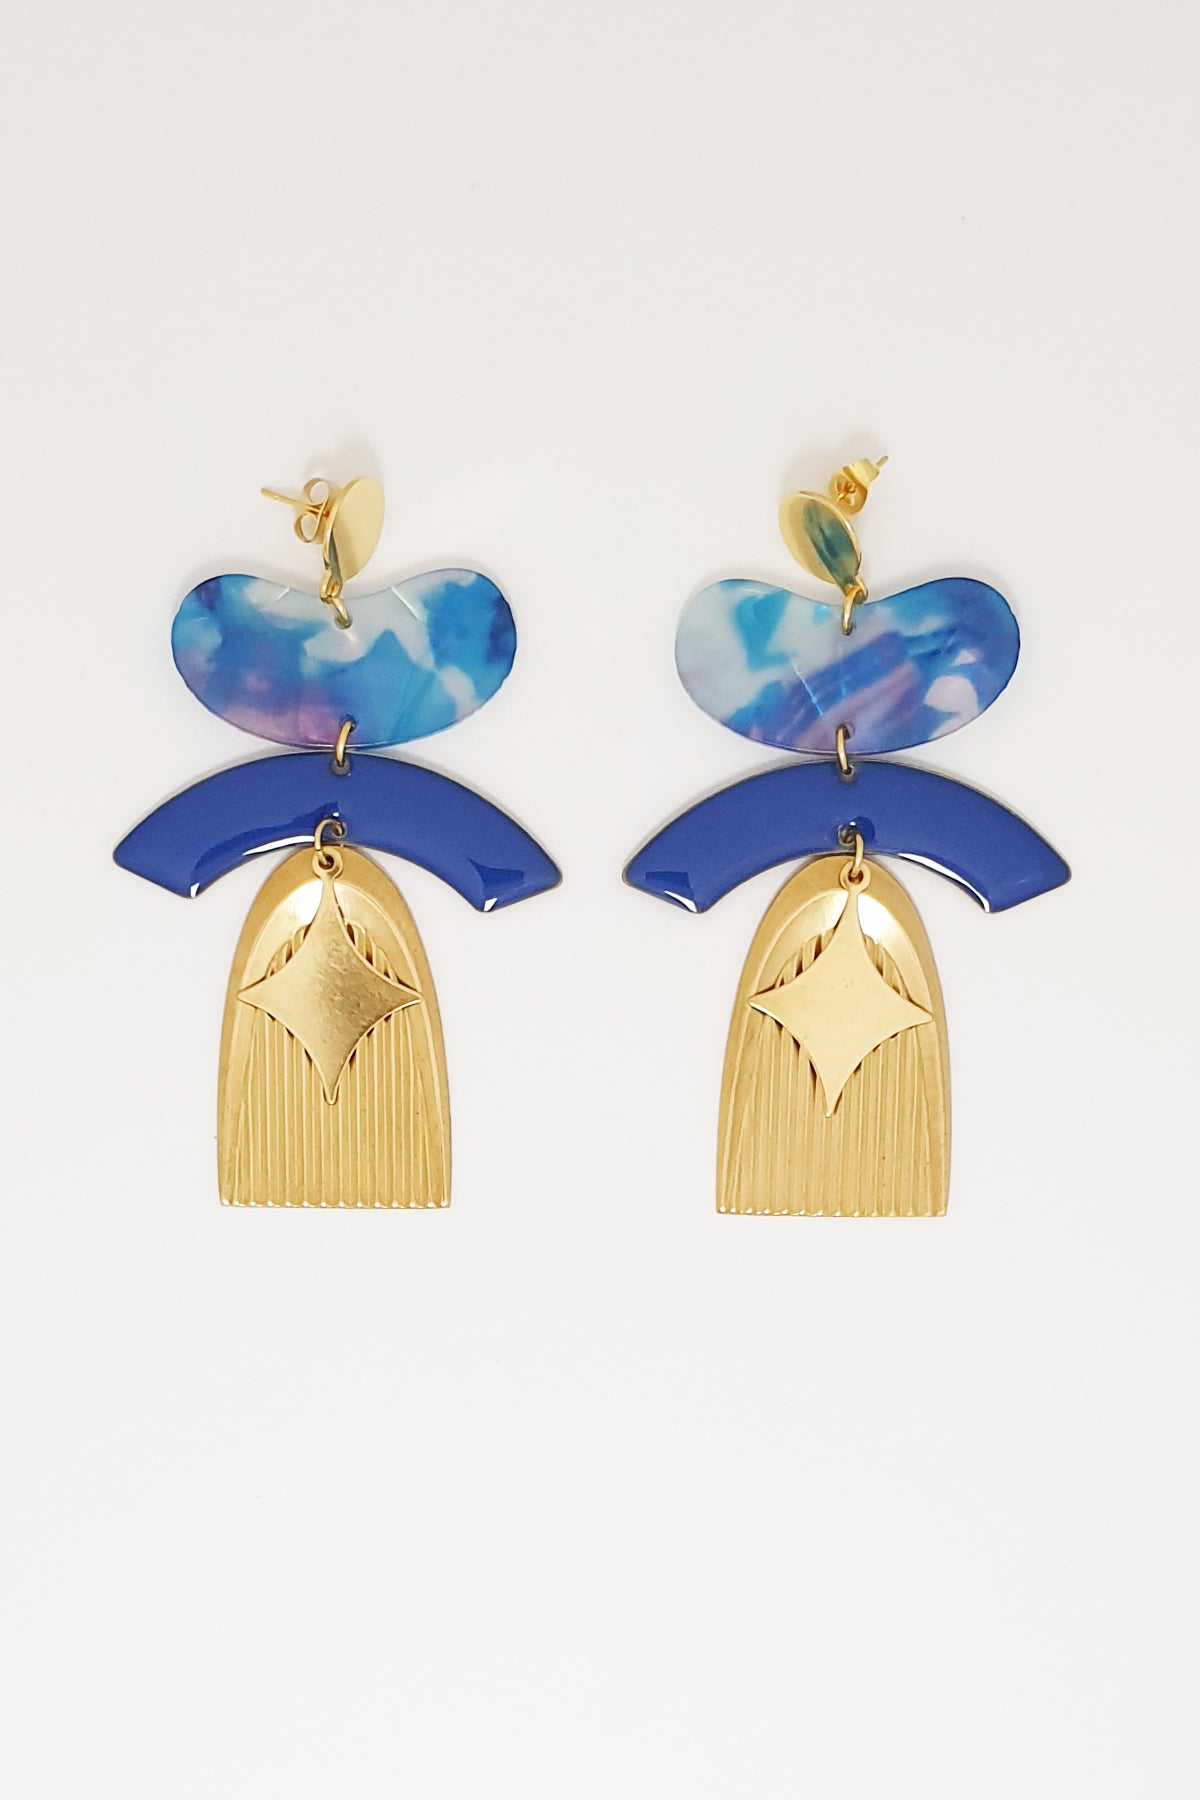 A pair of statement stud dangle earrings sit against a white background. They feature a sapphire blue jellybean shaped acrylic piece, a sapphire blue arch shaped enamel connector, a corrugated textured brass arch piece, and a diamond shaped brass piece.